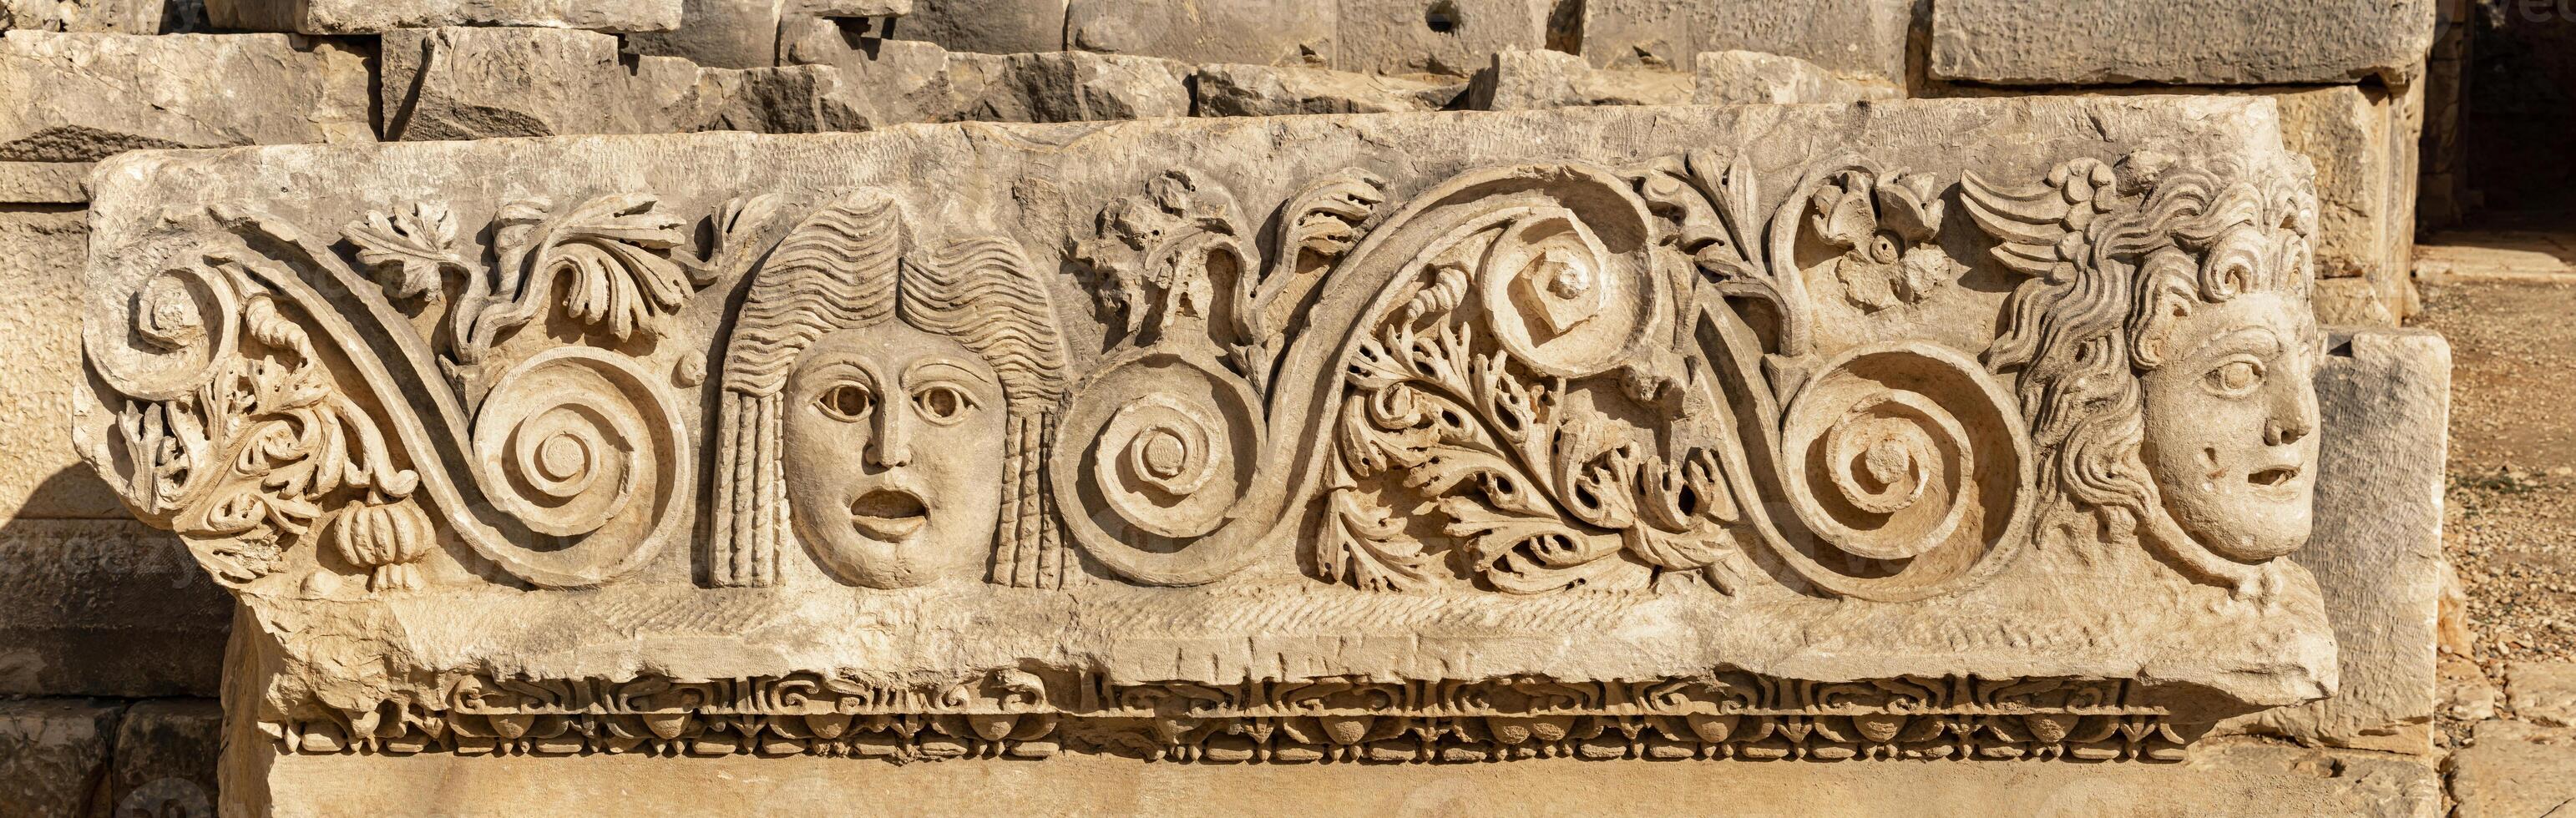 antique frieze with stone-cut faces in the ruins of the ancient city of Myra, Turkey photo